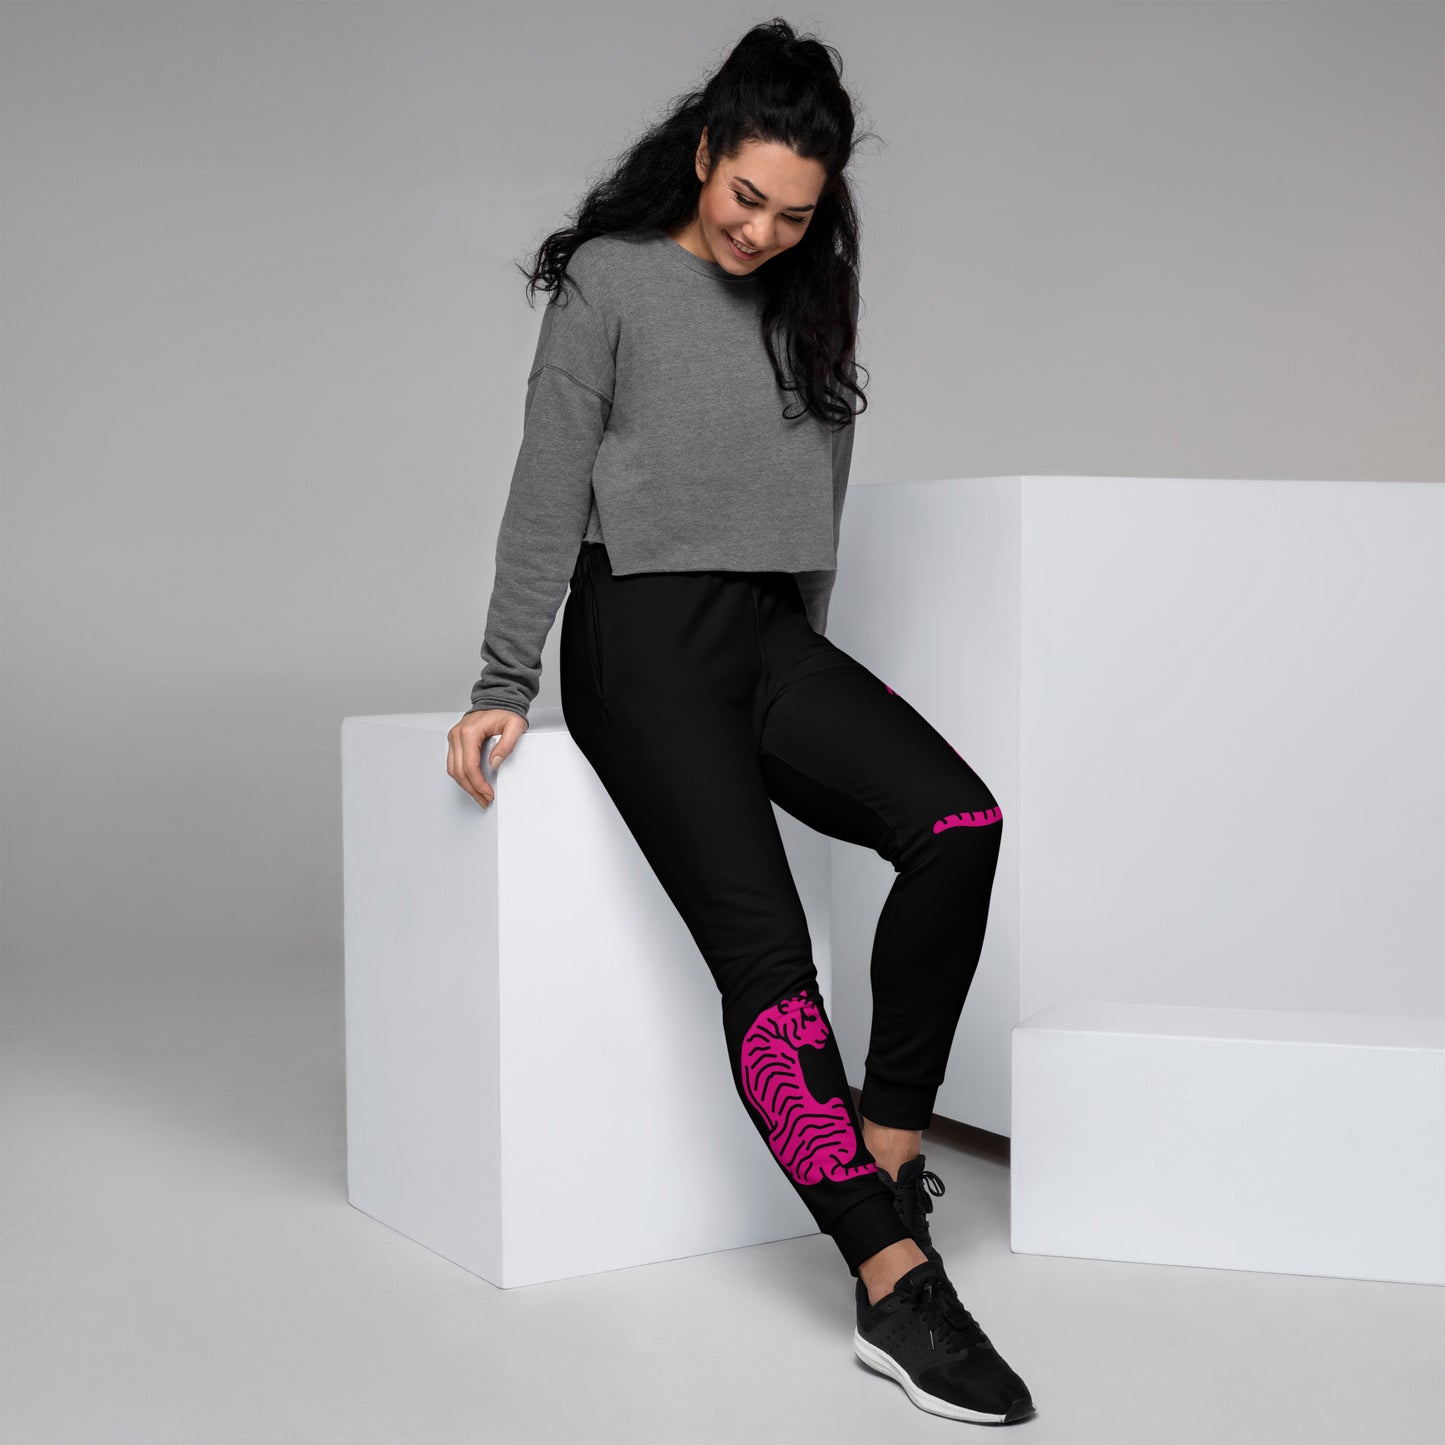 Women's Joggers Black with Hot Pink Tiger - DMD Bags